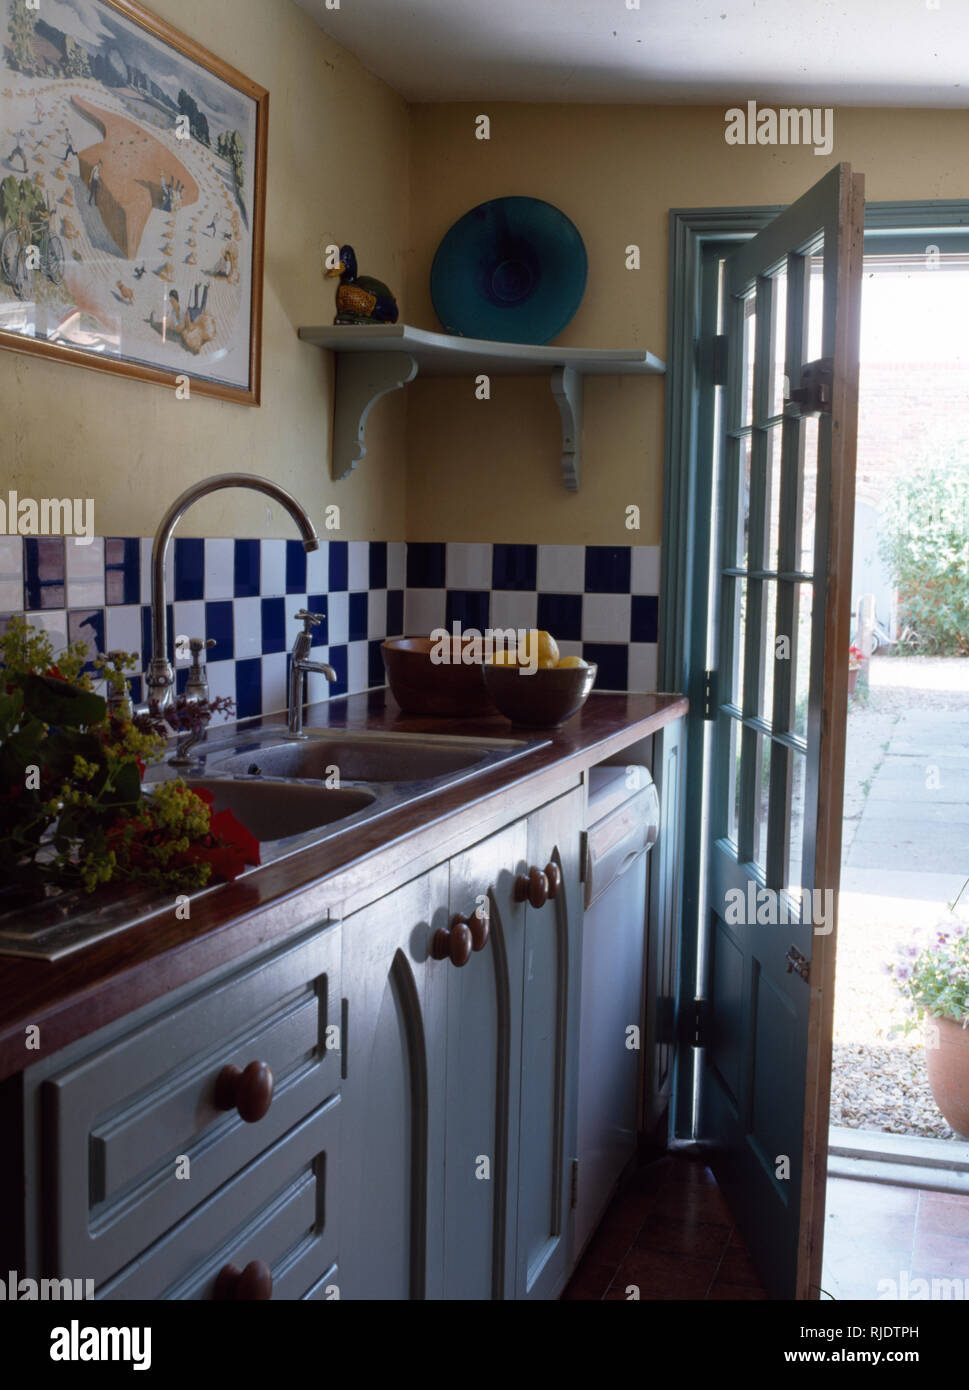 Blue+white tiles above sinks in cottage kitchen Stock Photo